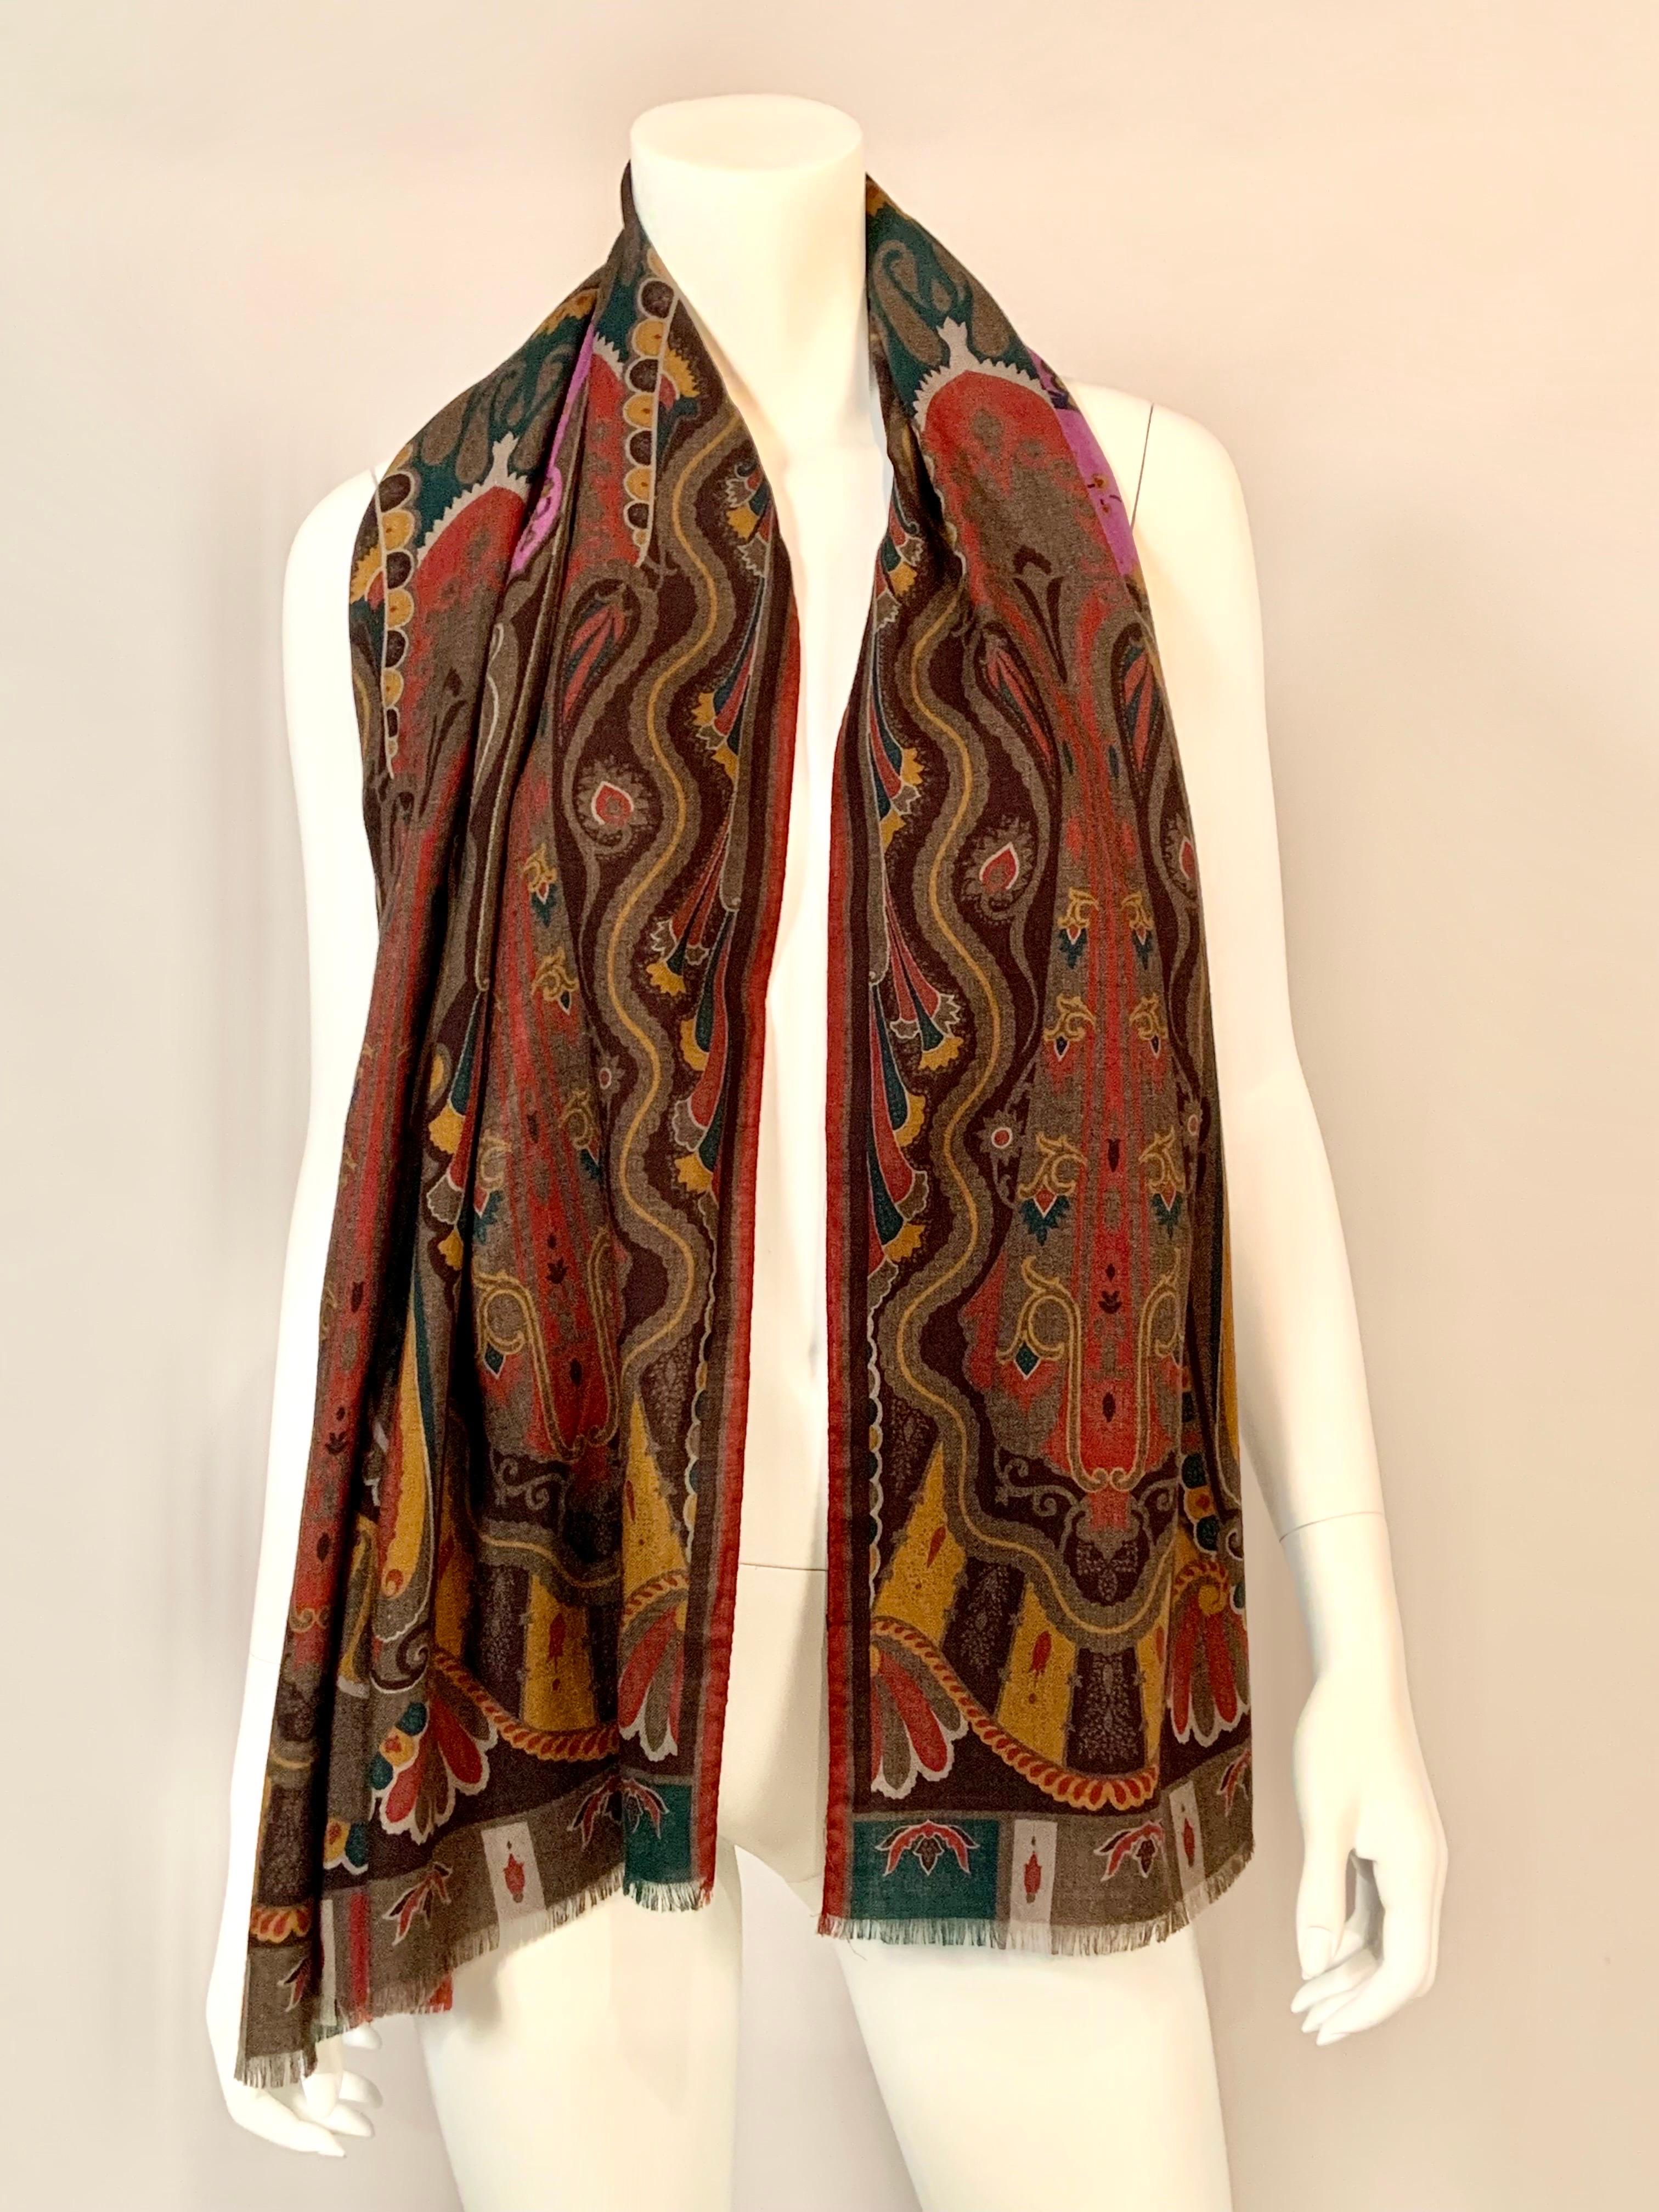 This colorful paisley patterned wool and silk scarf from Etro, Milano has a purple center and paisley designs in shades of olive, dark green, mustard, burnt orange, and brown.It is marked in the design on one corner and also bears the Etro label. It